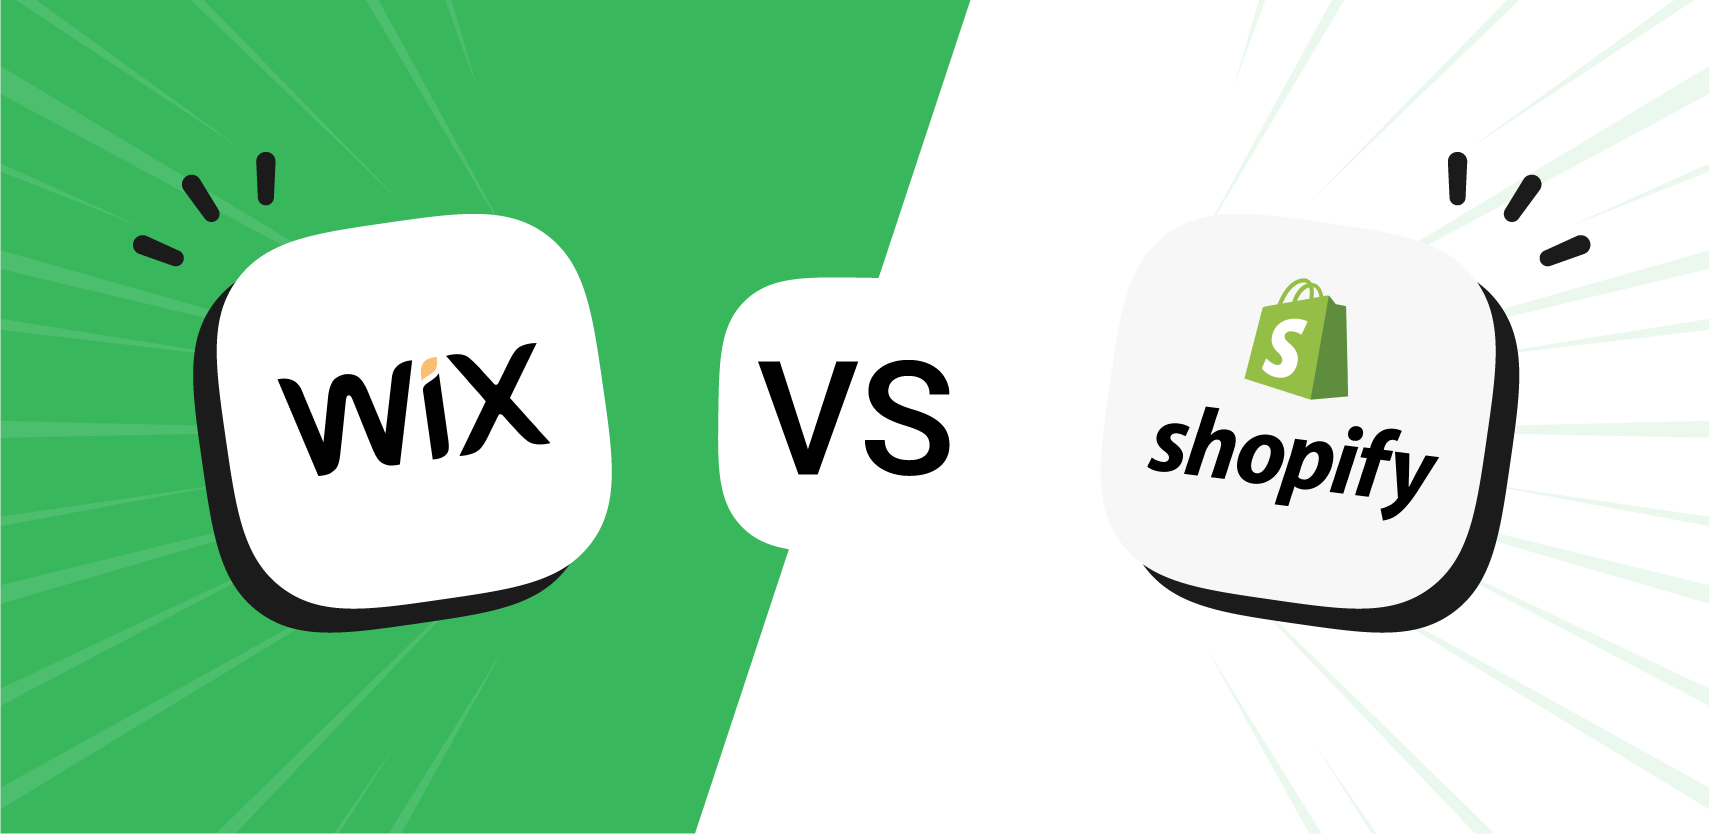 Shopify and Wix